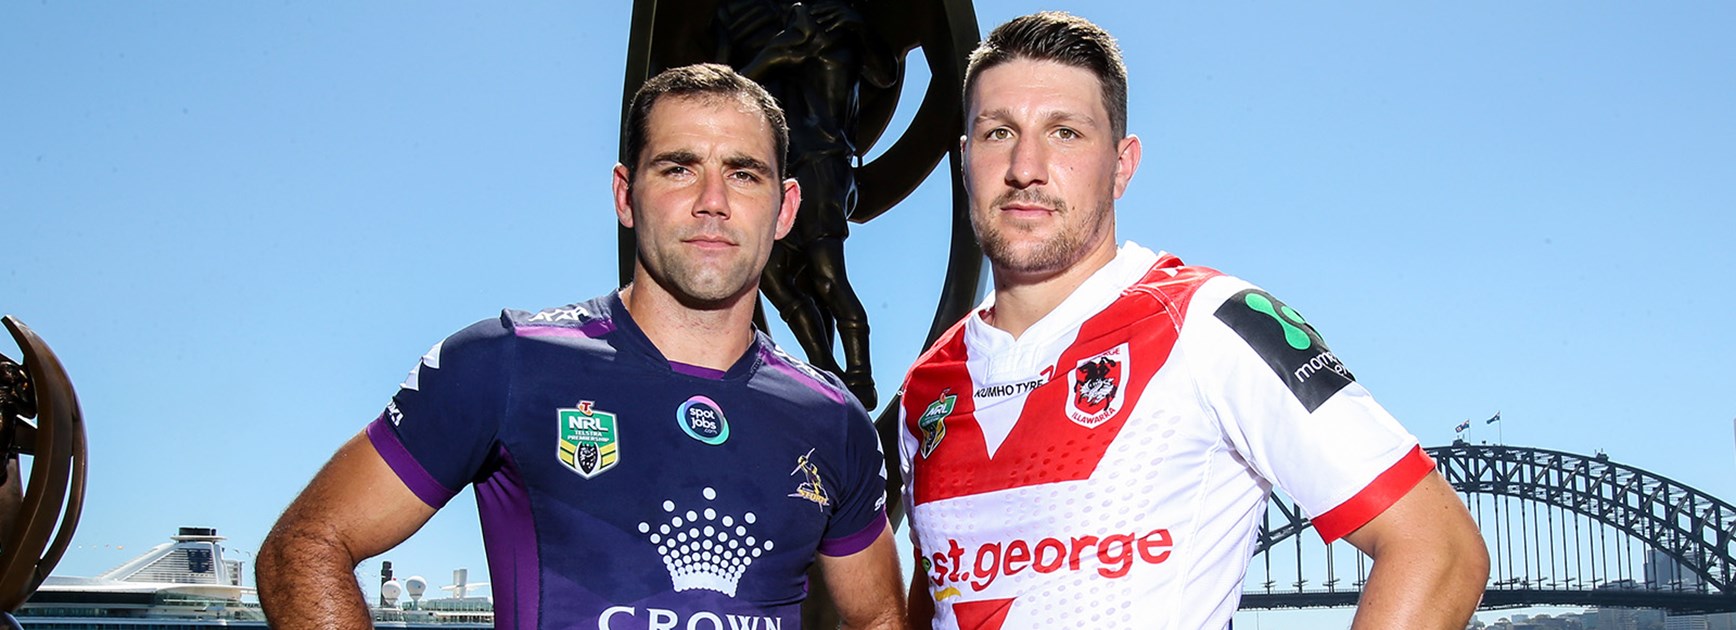 Melbourne will host the Dragons on Monday night to end Round 1 of the NRL Telstra Premiership.